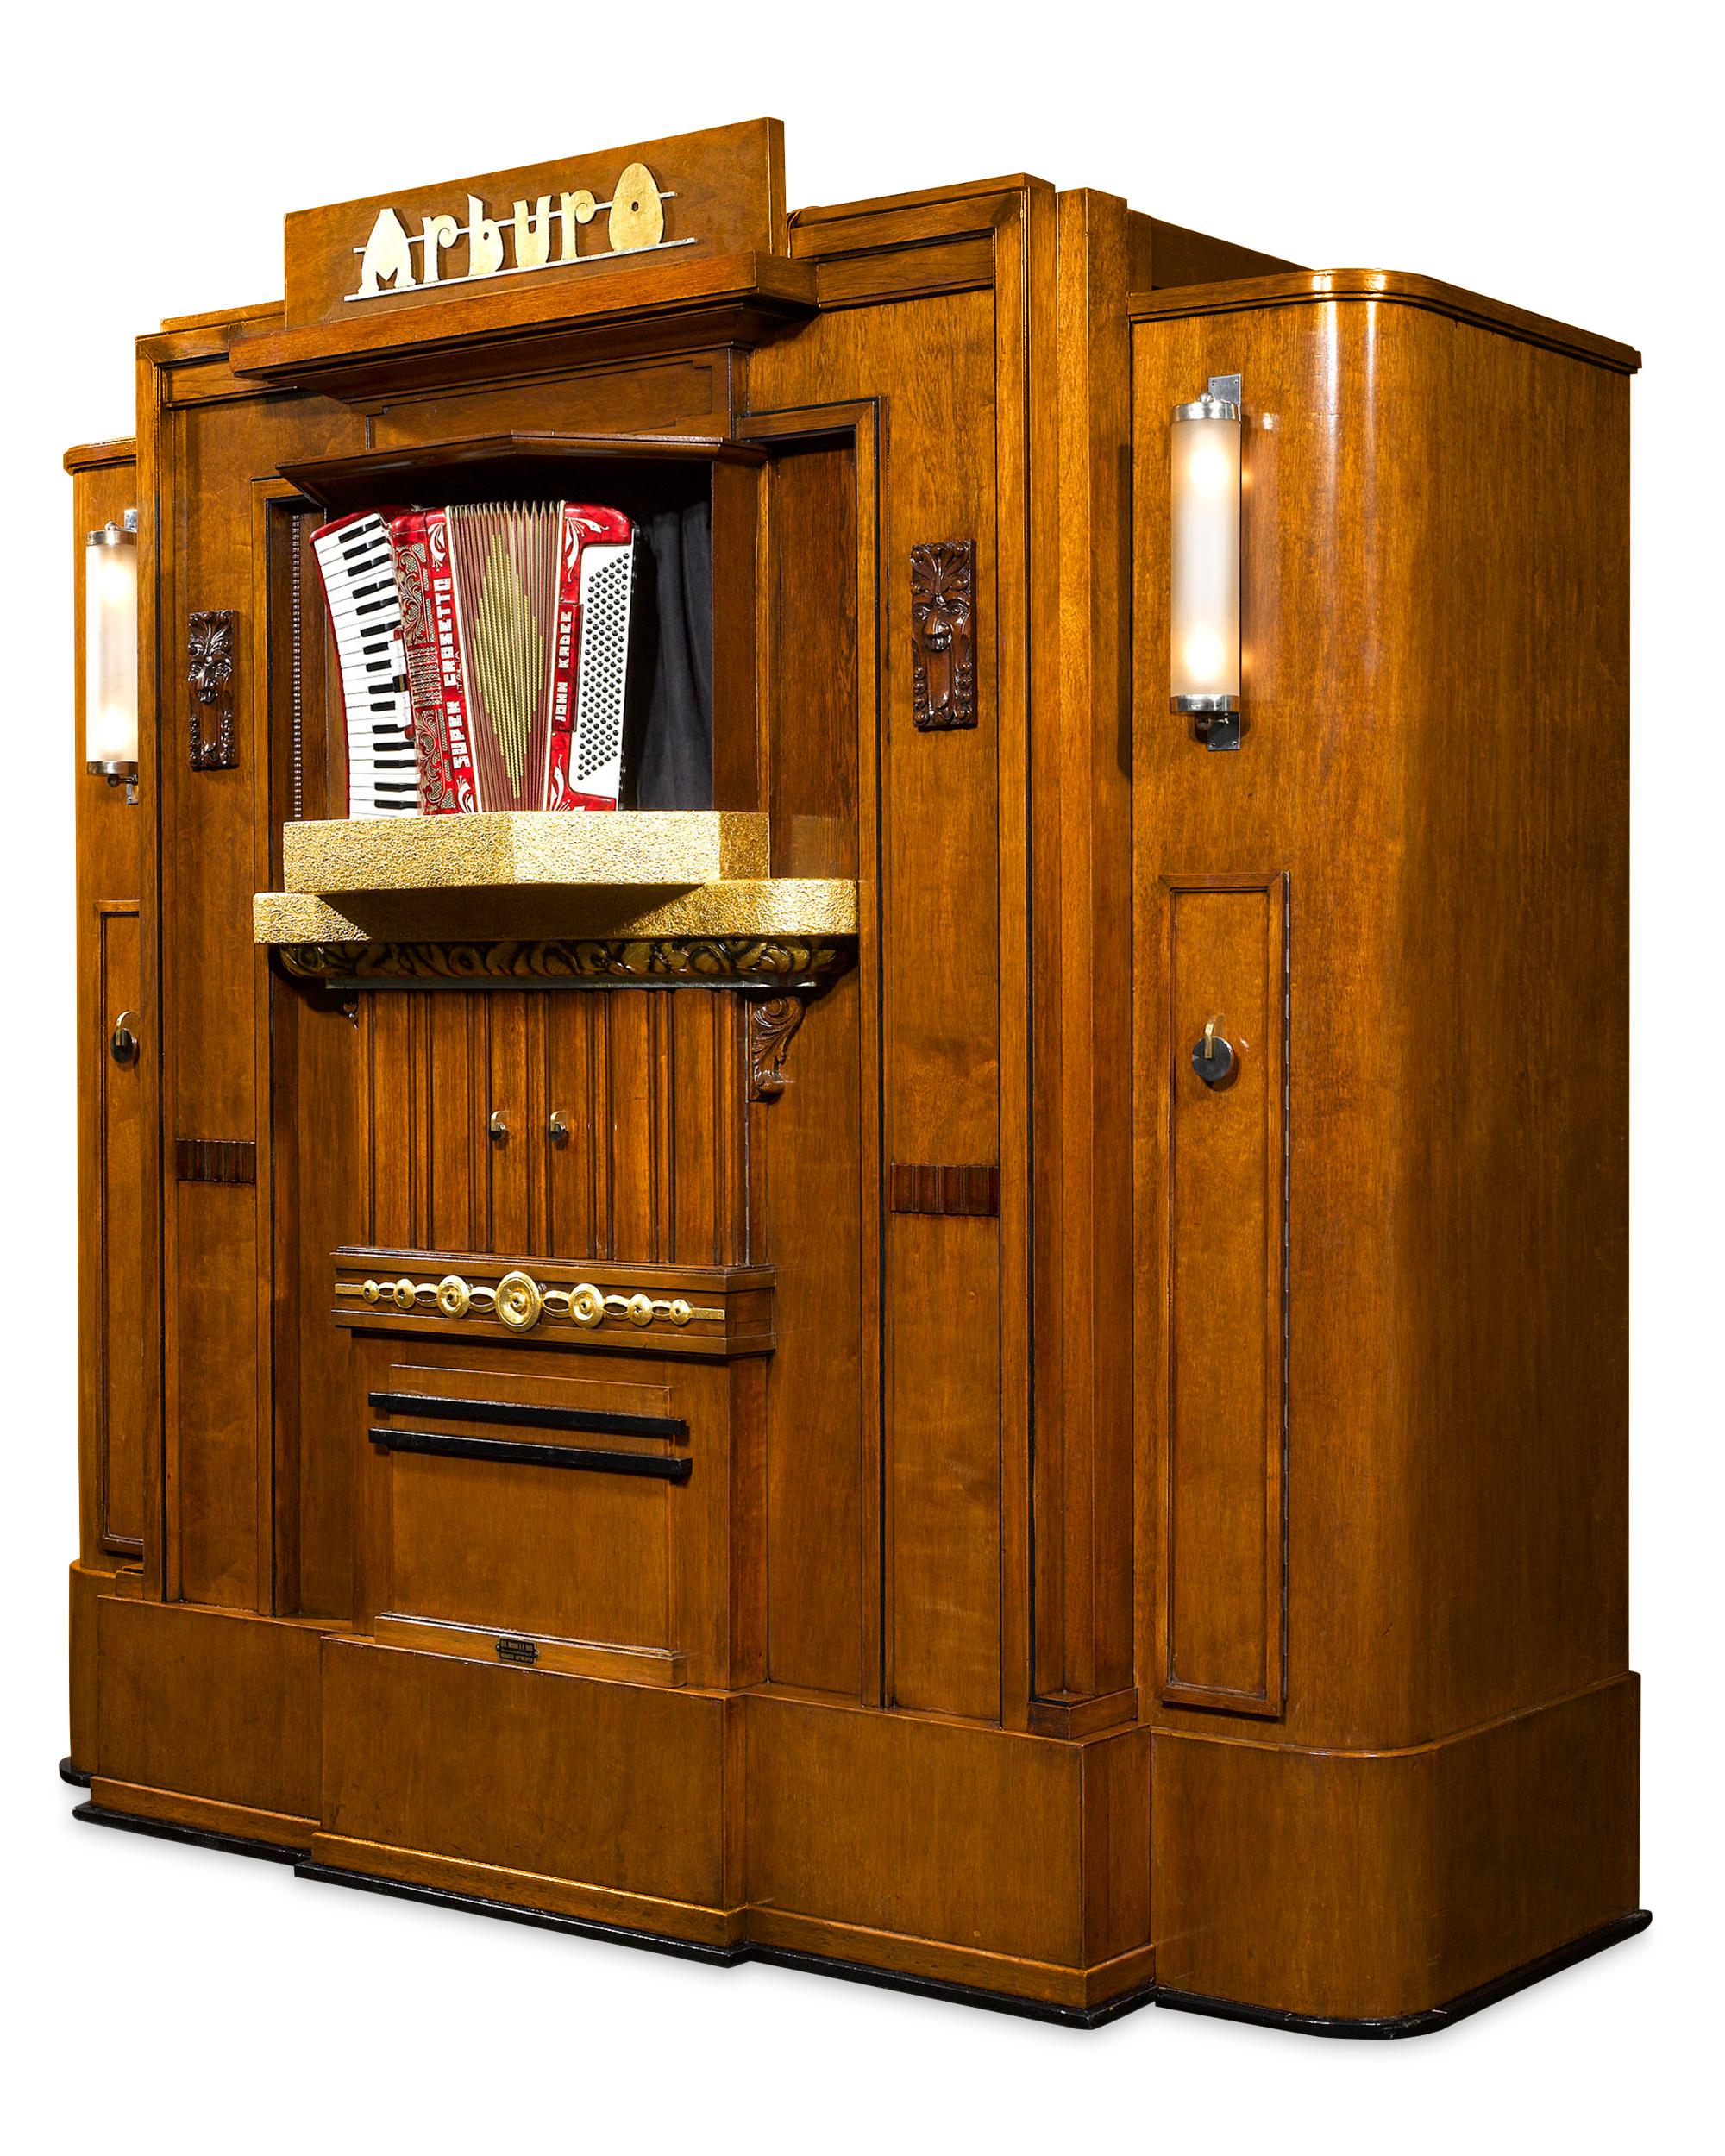 Art Deco Arburo Orchestrion Organ By Bursens And Roels For Sale